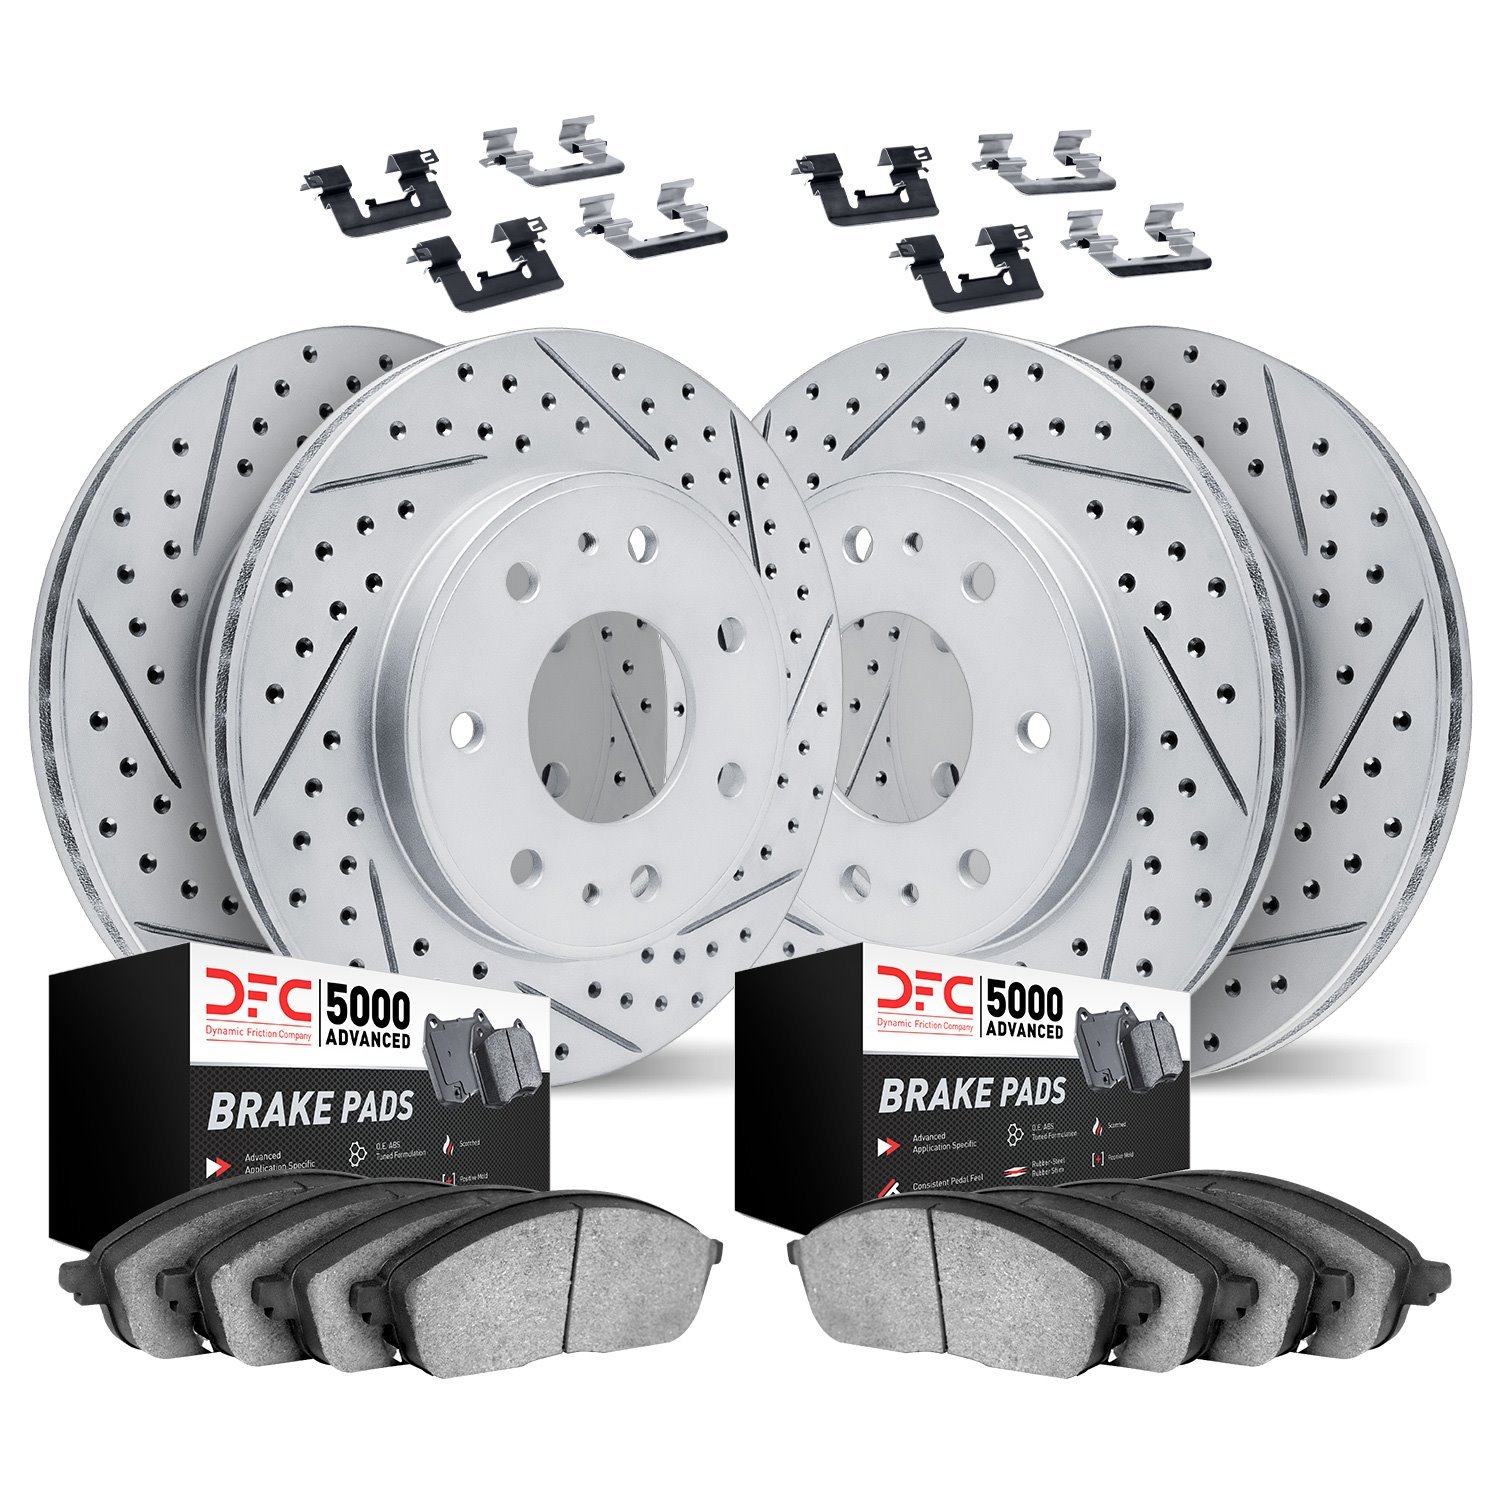 2504-54265 Geoperformance Drilled/Slotted Rotors w/5000 Advanced Brake Pads Kit, 2004-2008 Ford/Lincoln/Mercury/Mazda, Position: